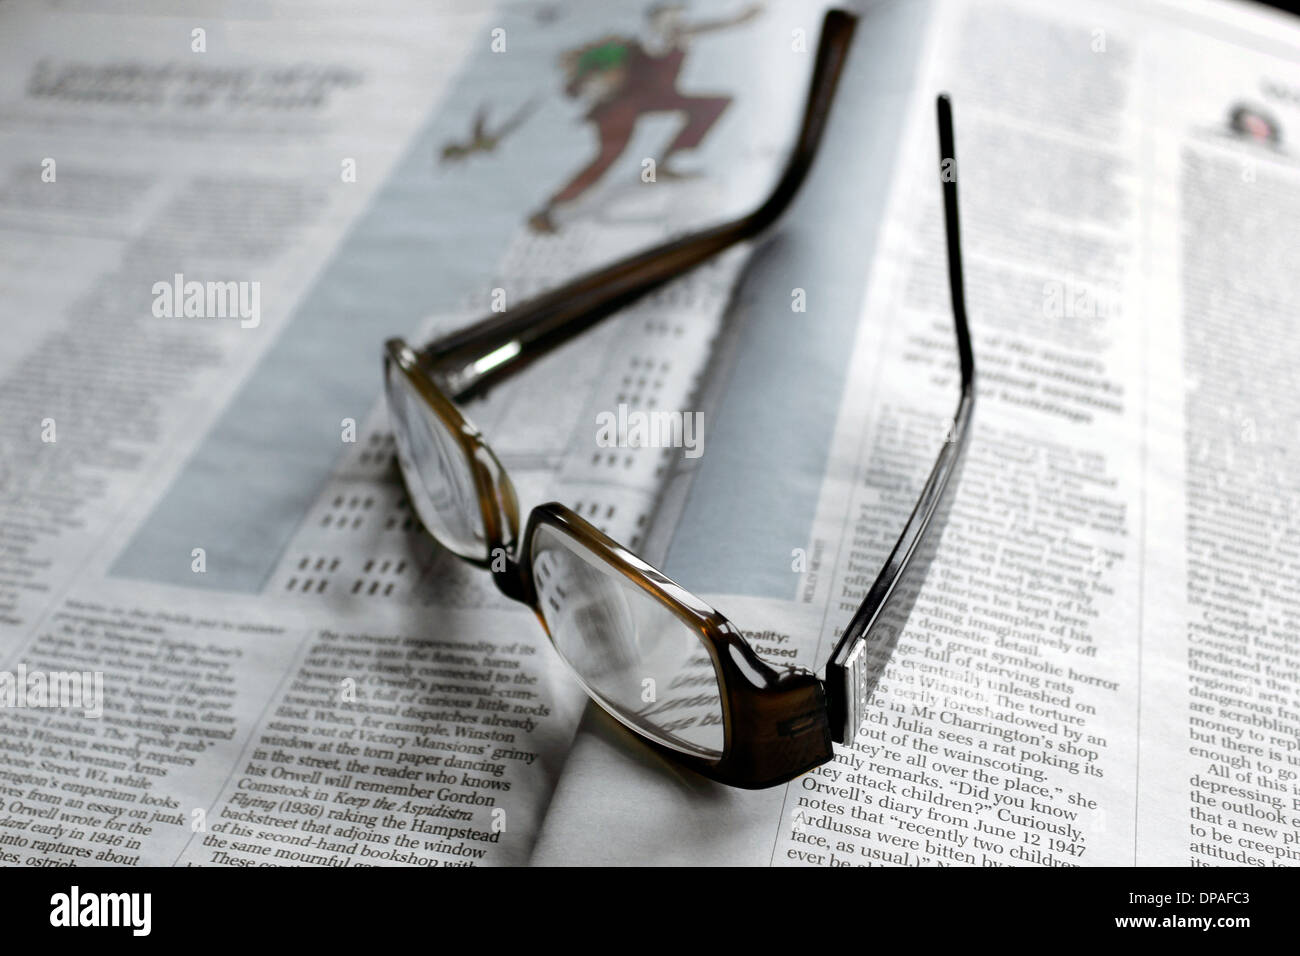 Reading spectacles placed on open article Stock Photo